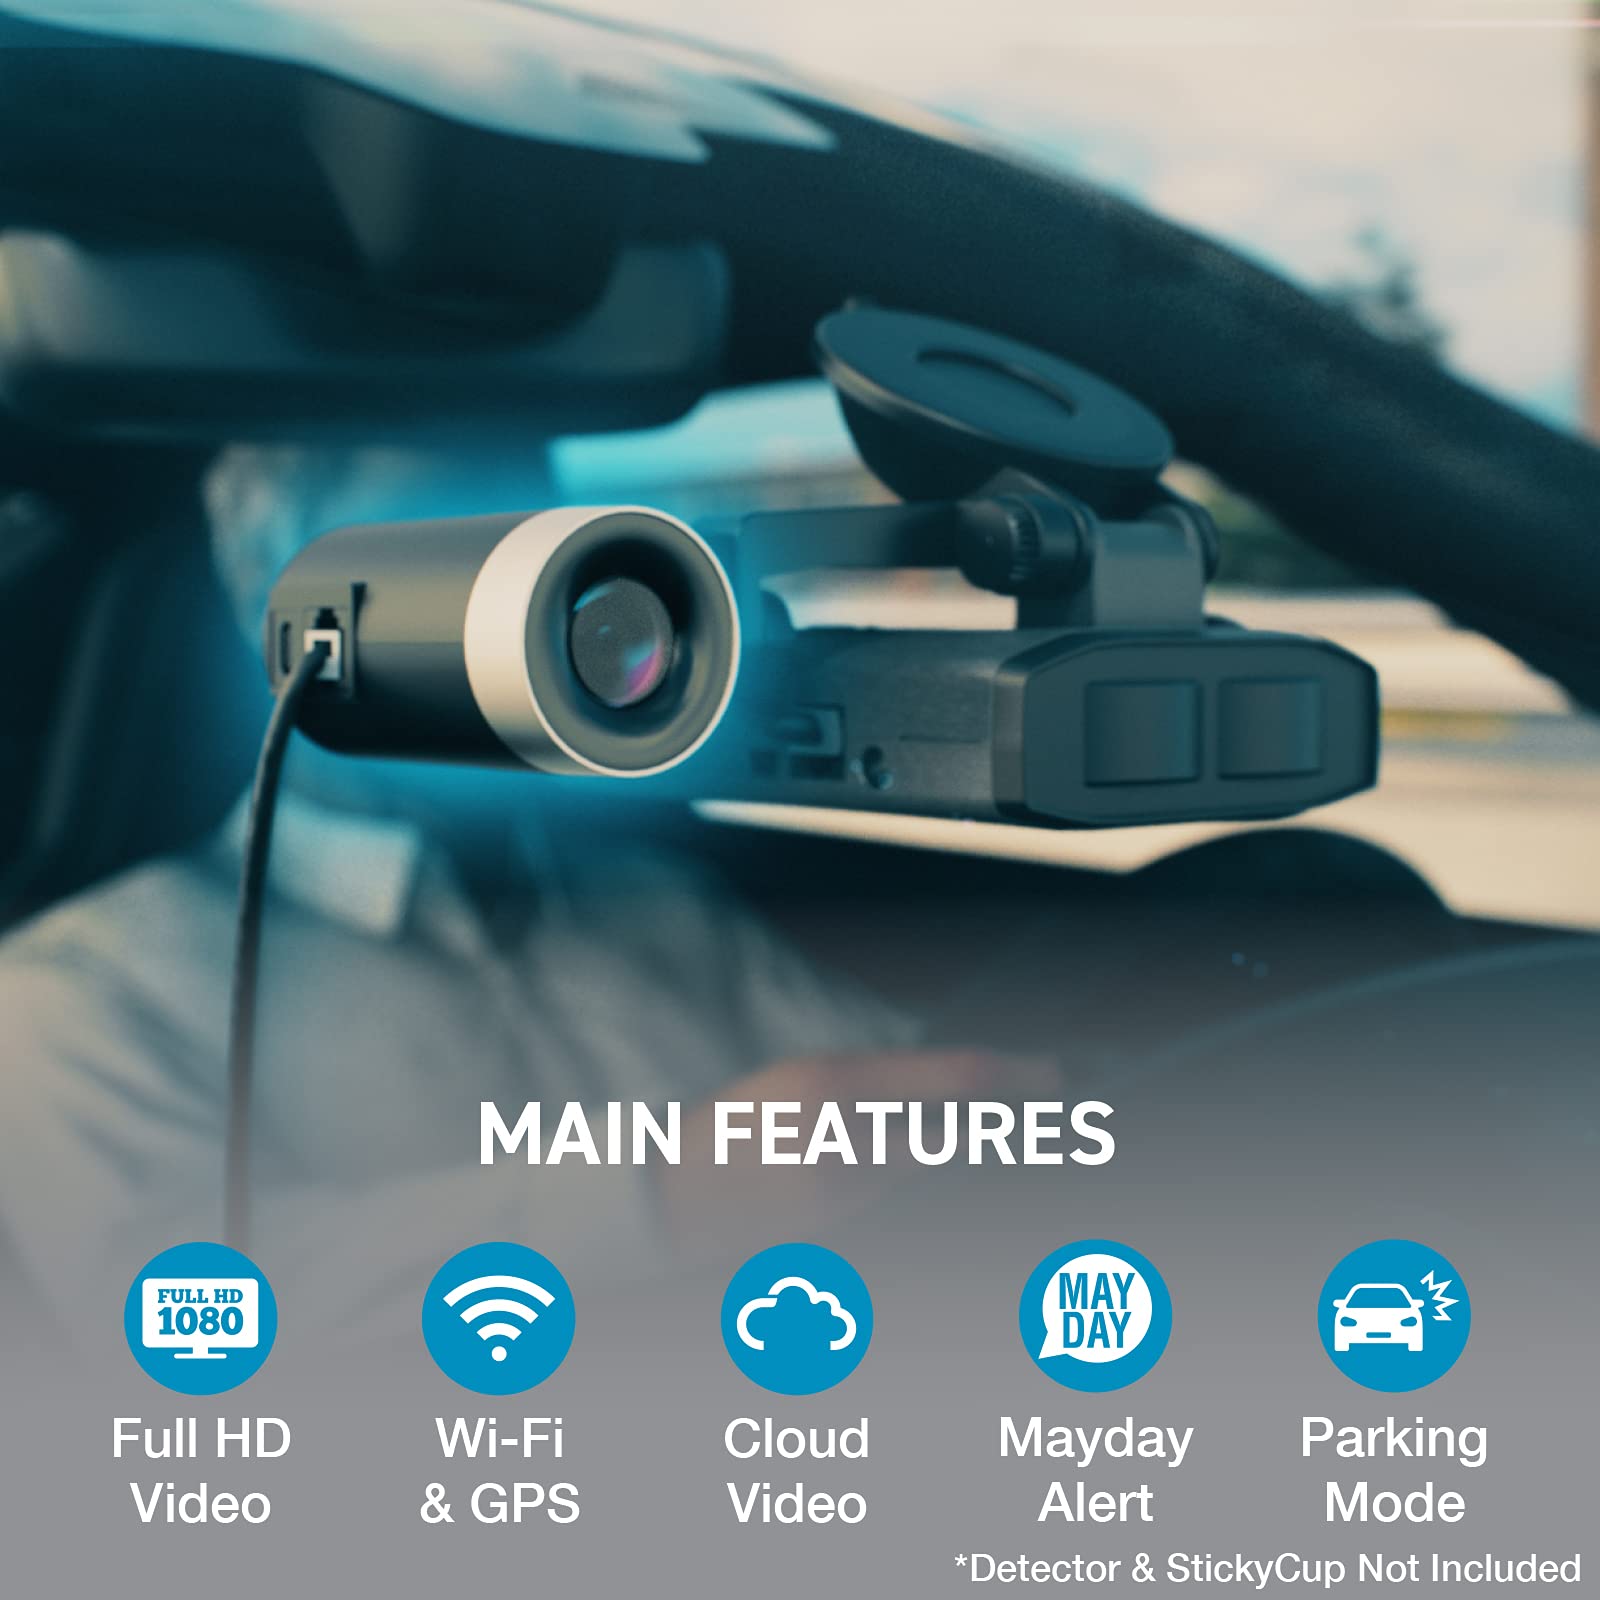 Escort M2 Smart Dash Cam – 1080P Full HD Video Dash Cam, Incident Reports, Parking Mode, Drive Smarter App, Wi-Fi & GPS, 16GB Micro SD Card, Compatible with MAX 360c, MAX 360